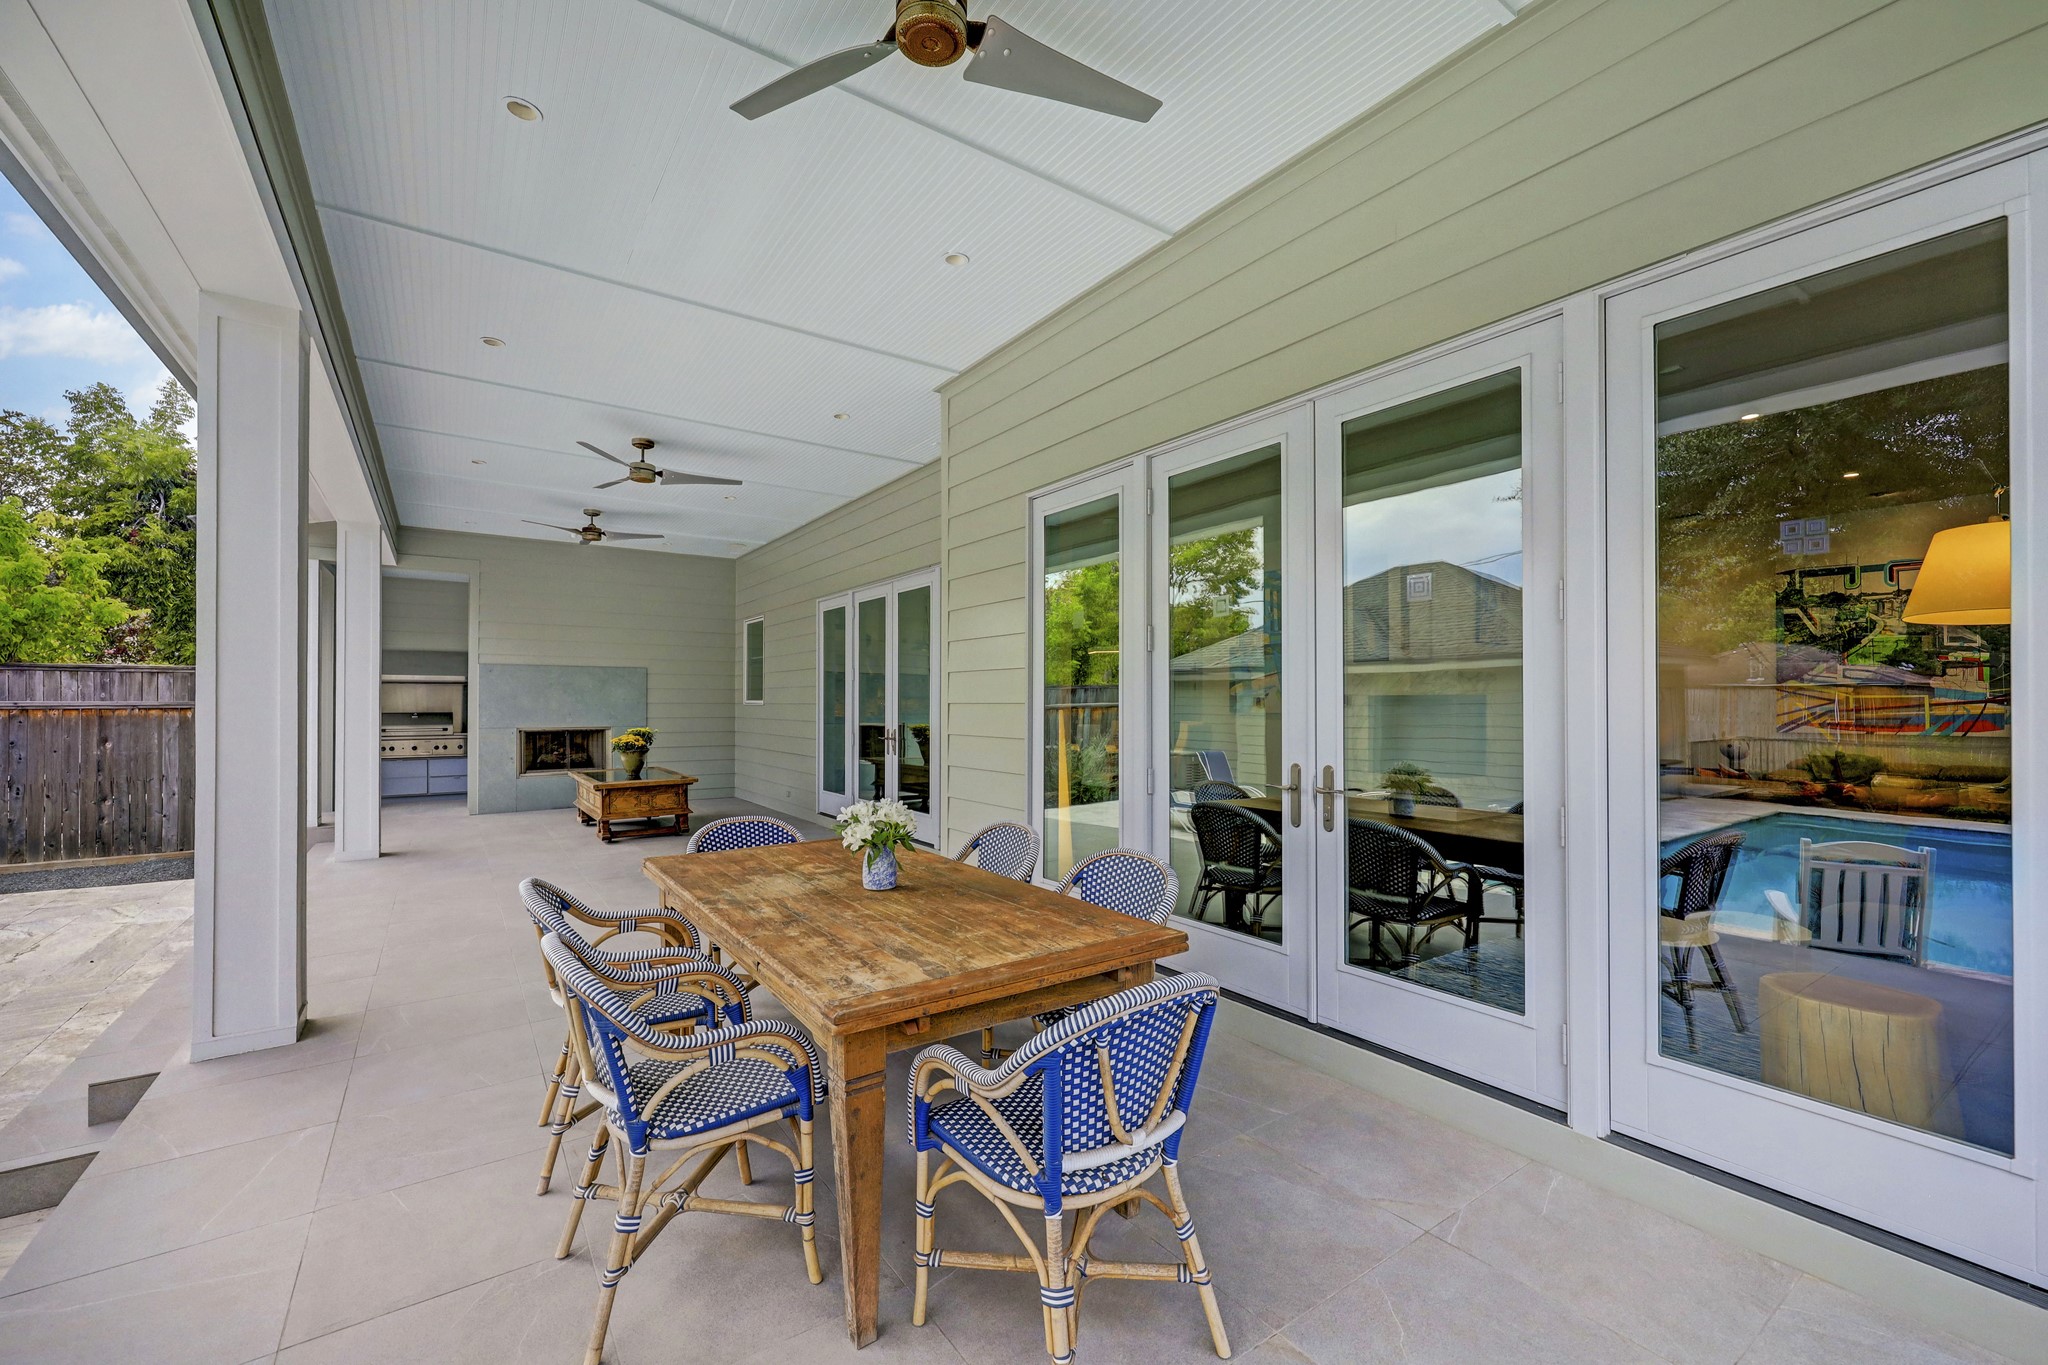 The patio stretches the width of the house so there is plenty of room for you and your guests to dine and lounge. It’s the indoor/outdoor lifestyle you have been waiting for!